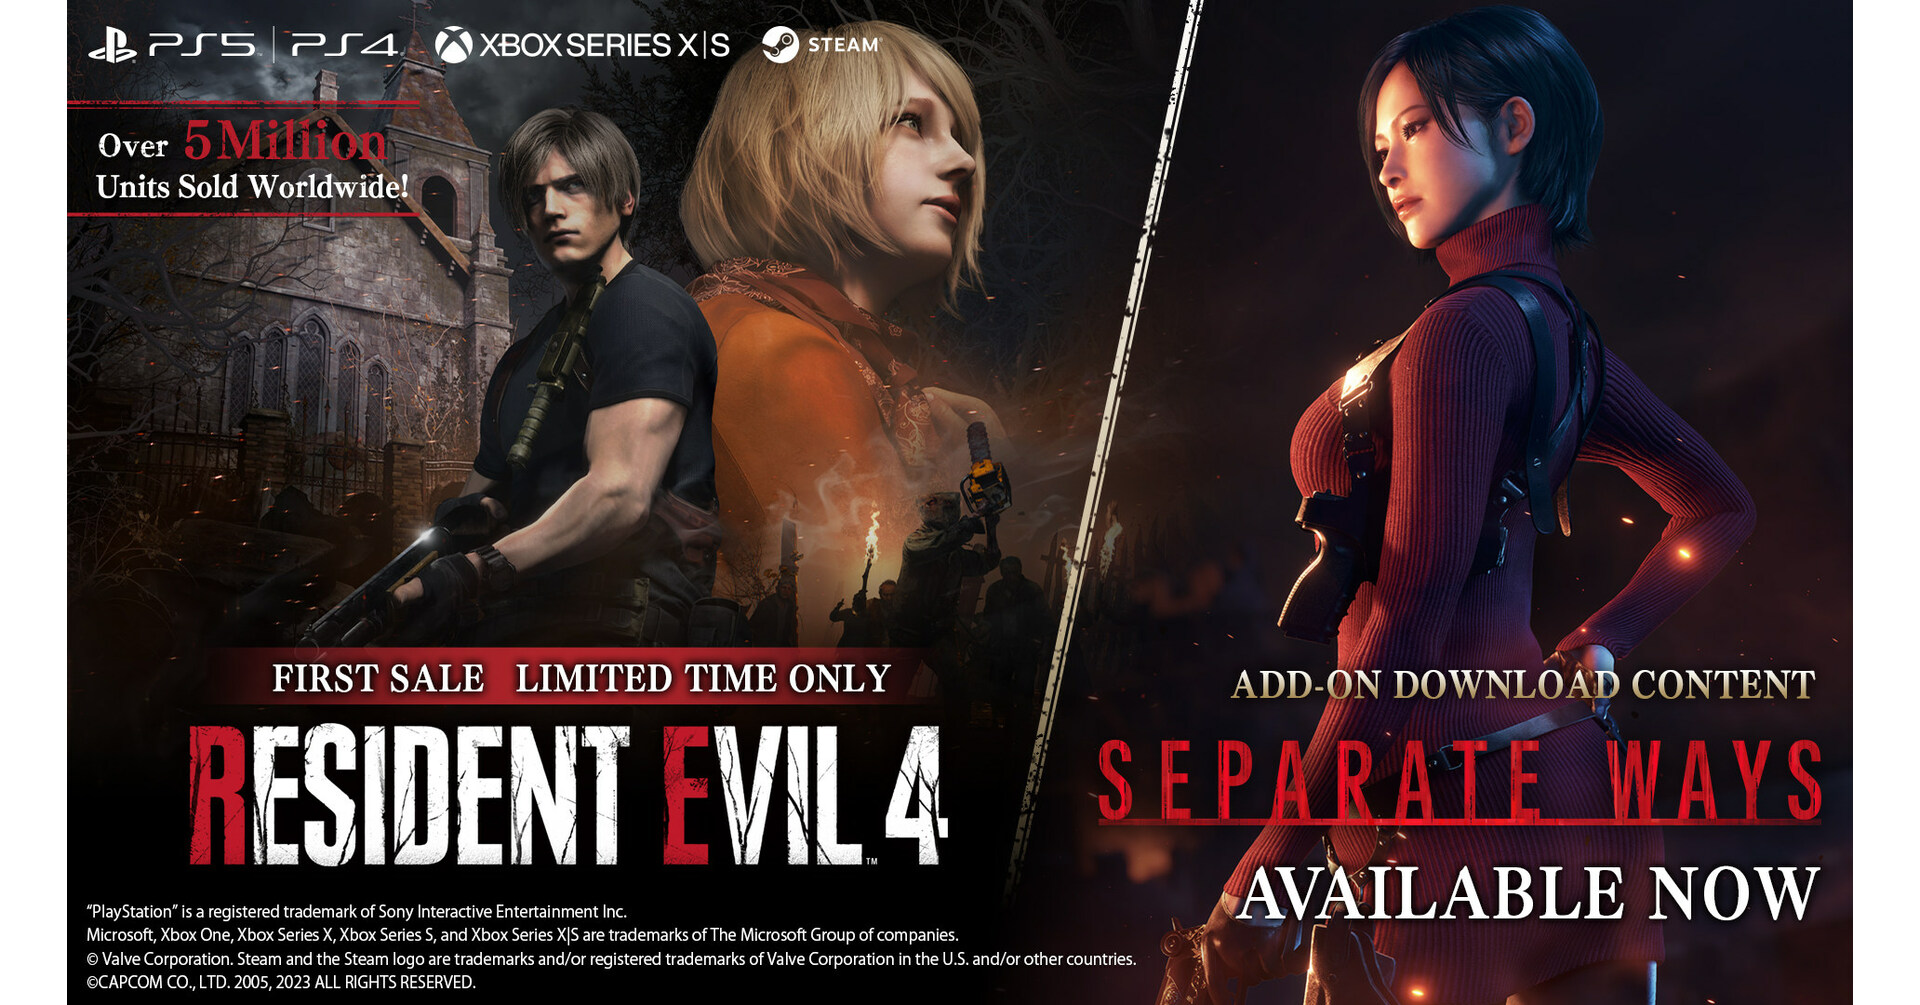 Additional story DLC for Resident Evil 4 out now, offers new